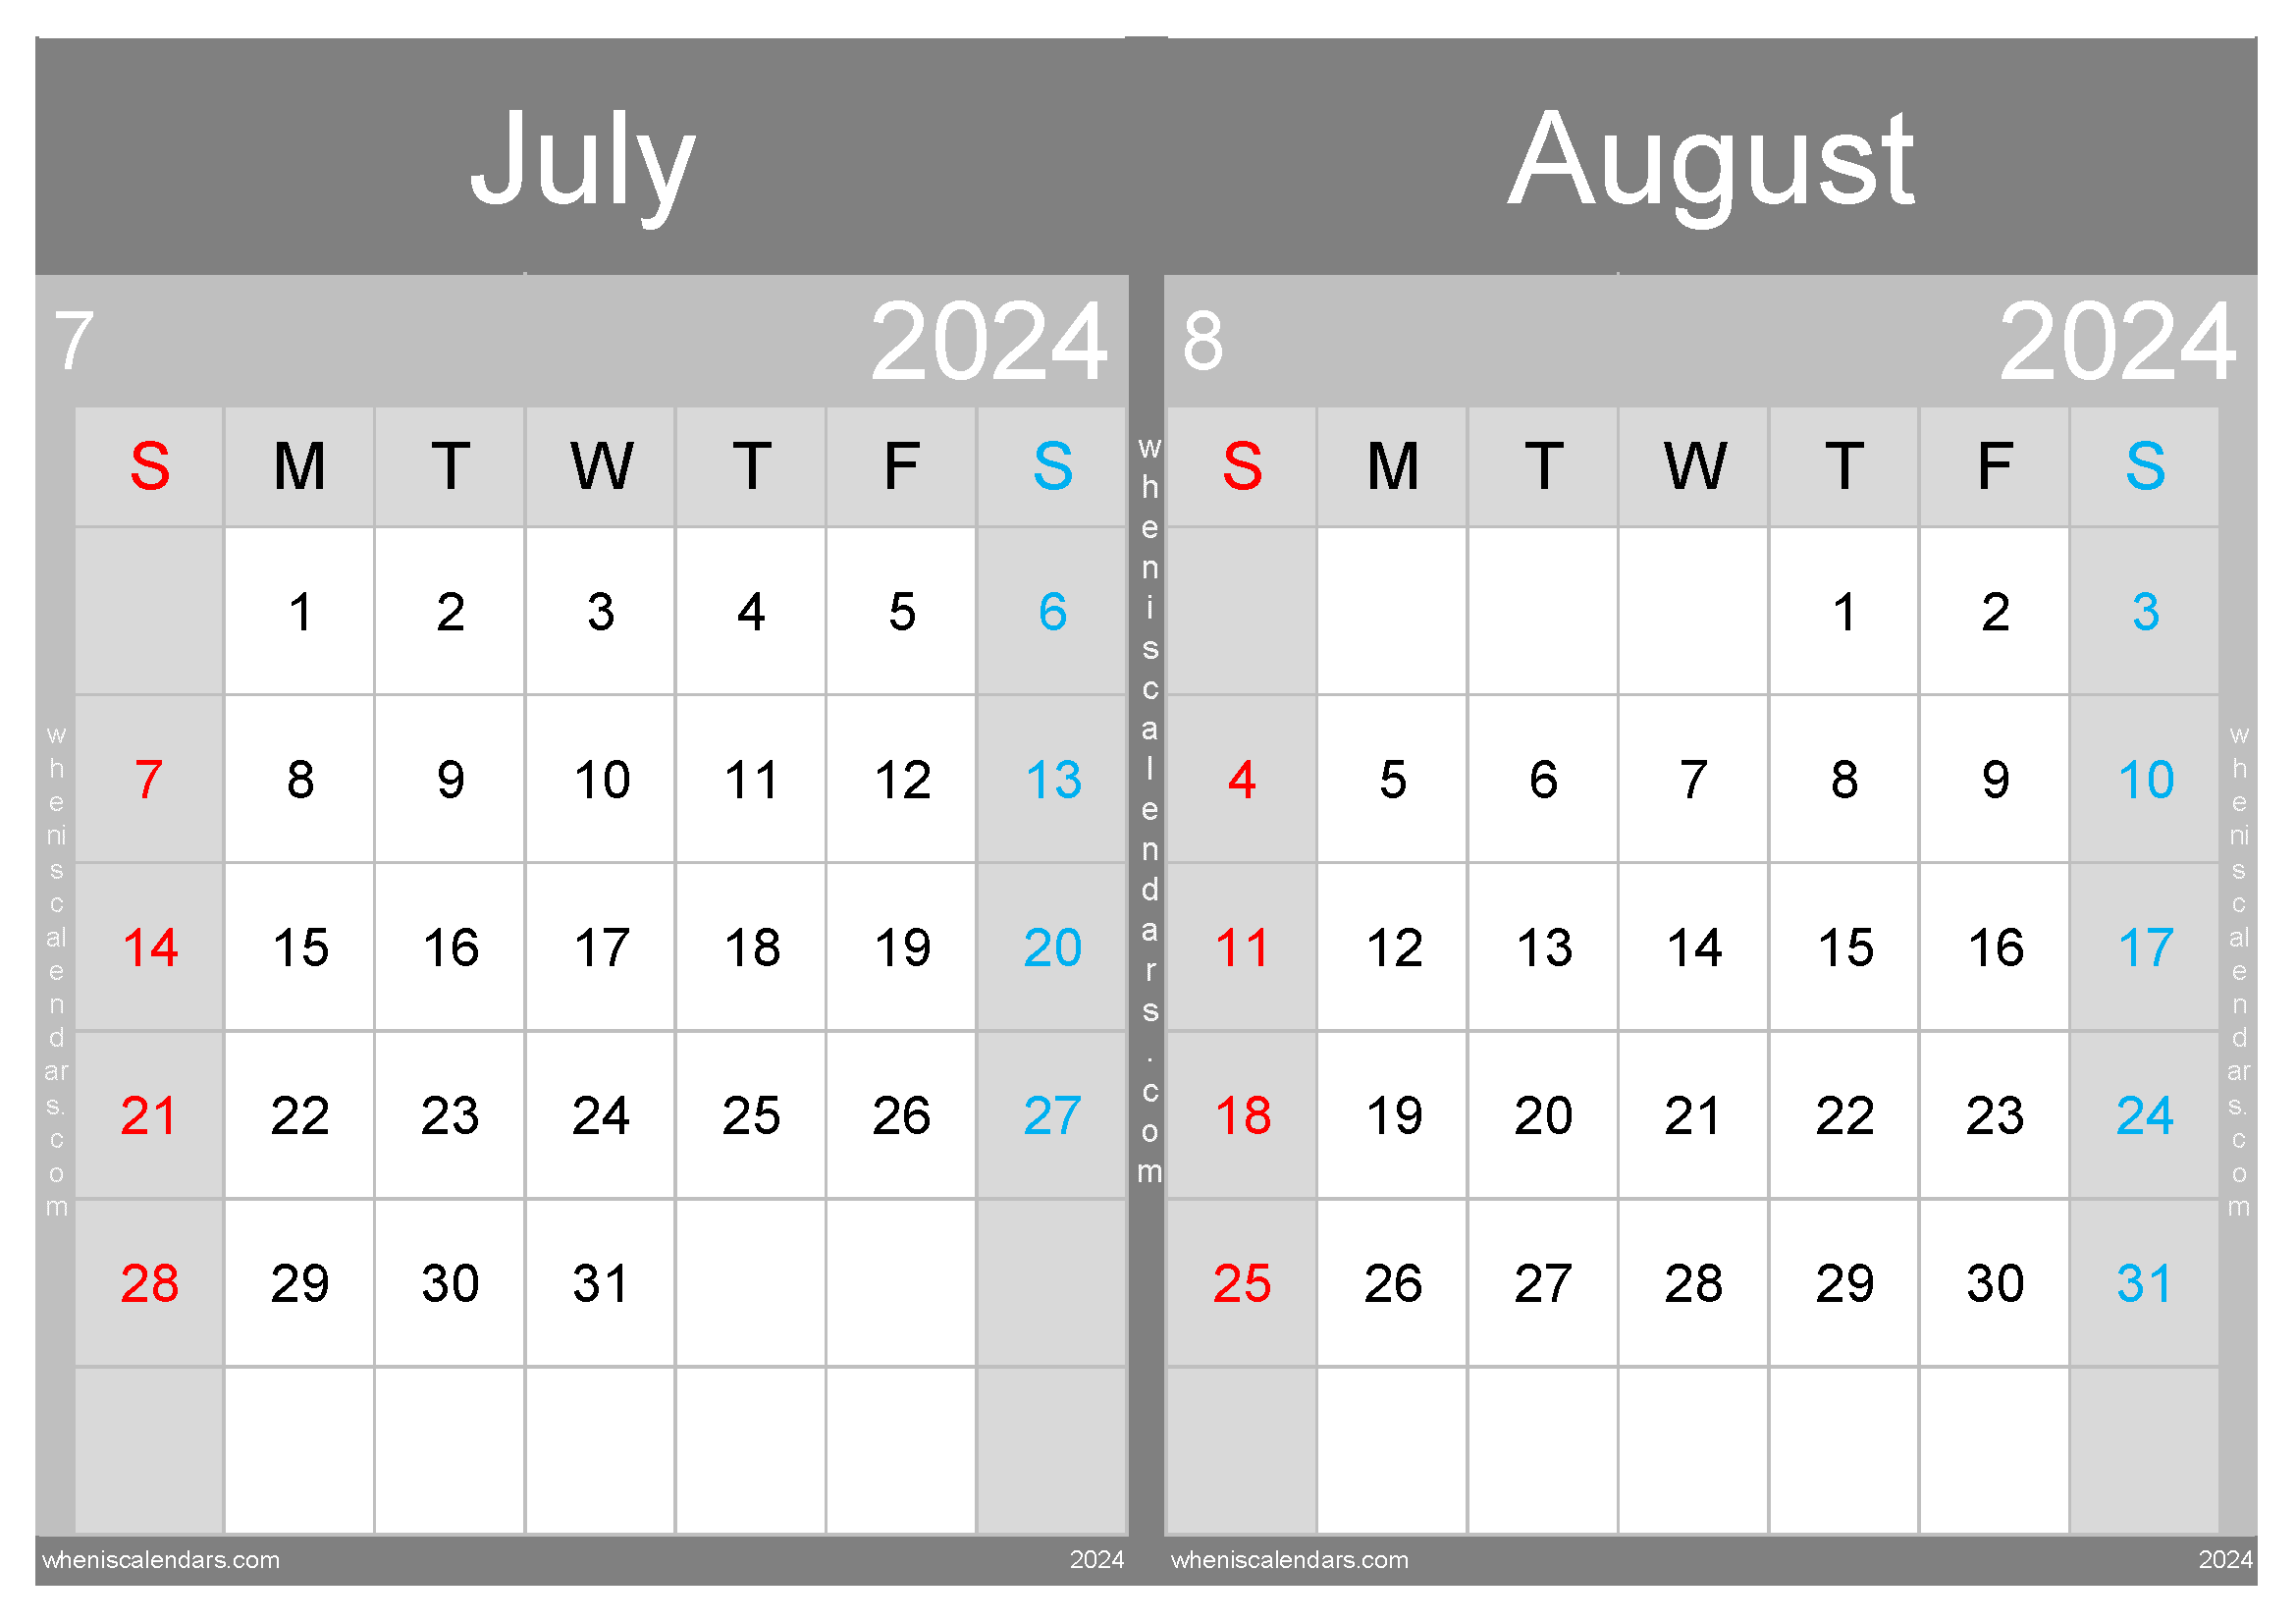 Download 2024 calendar July and August A4 JA24032